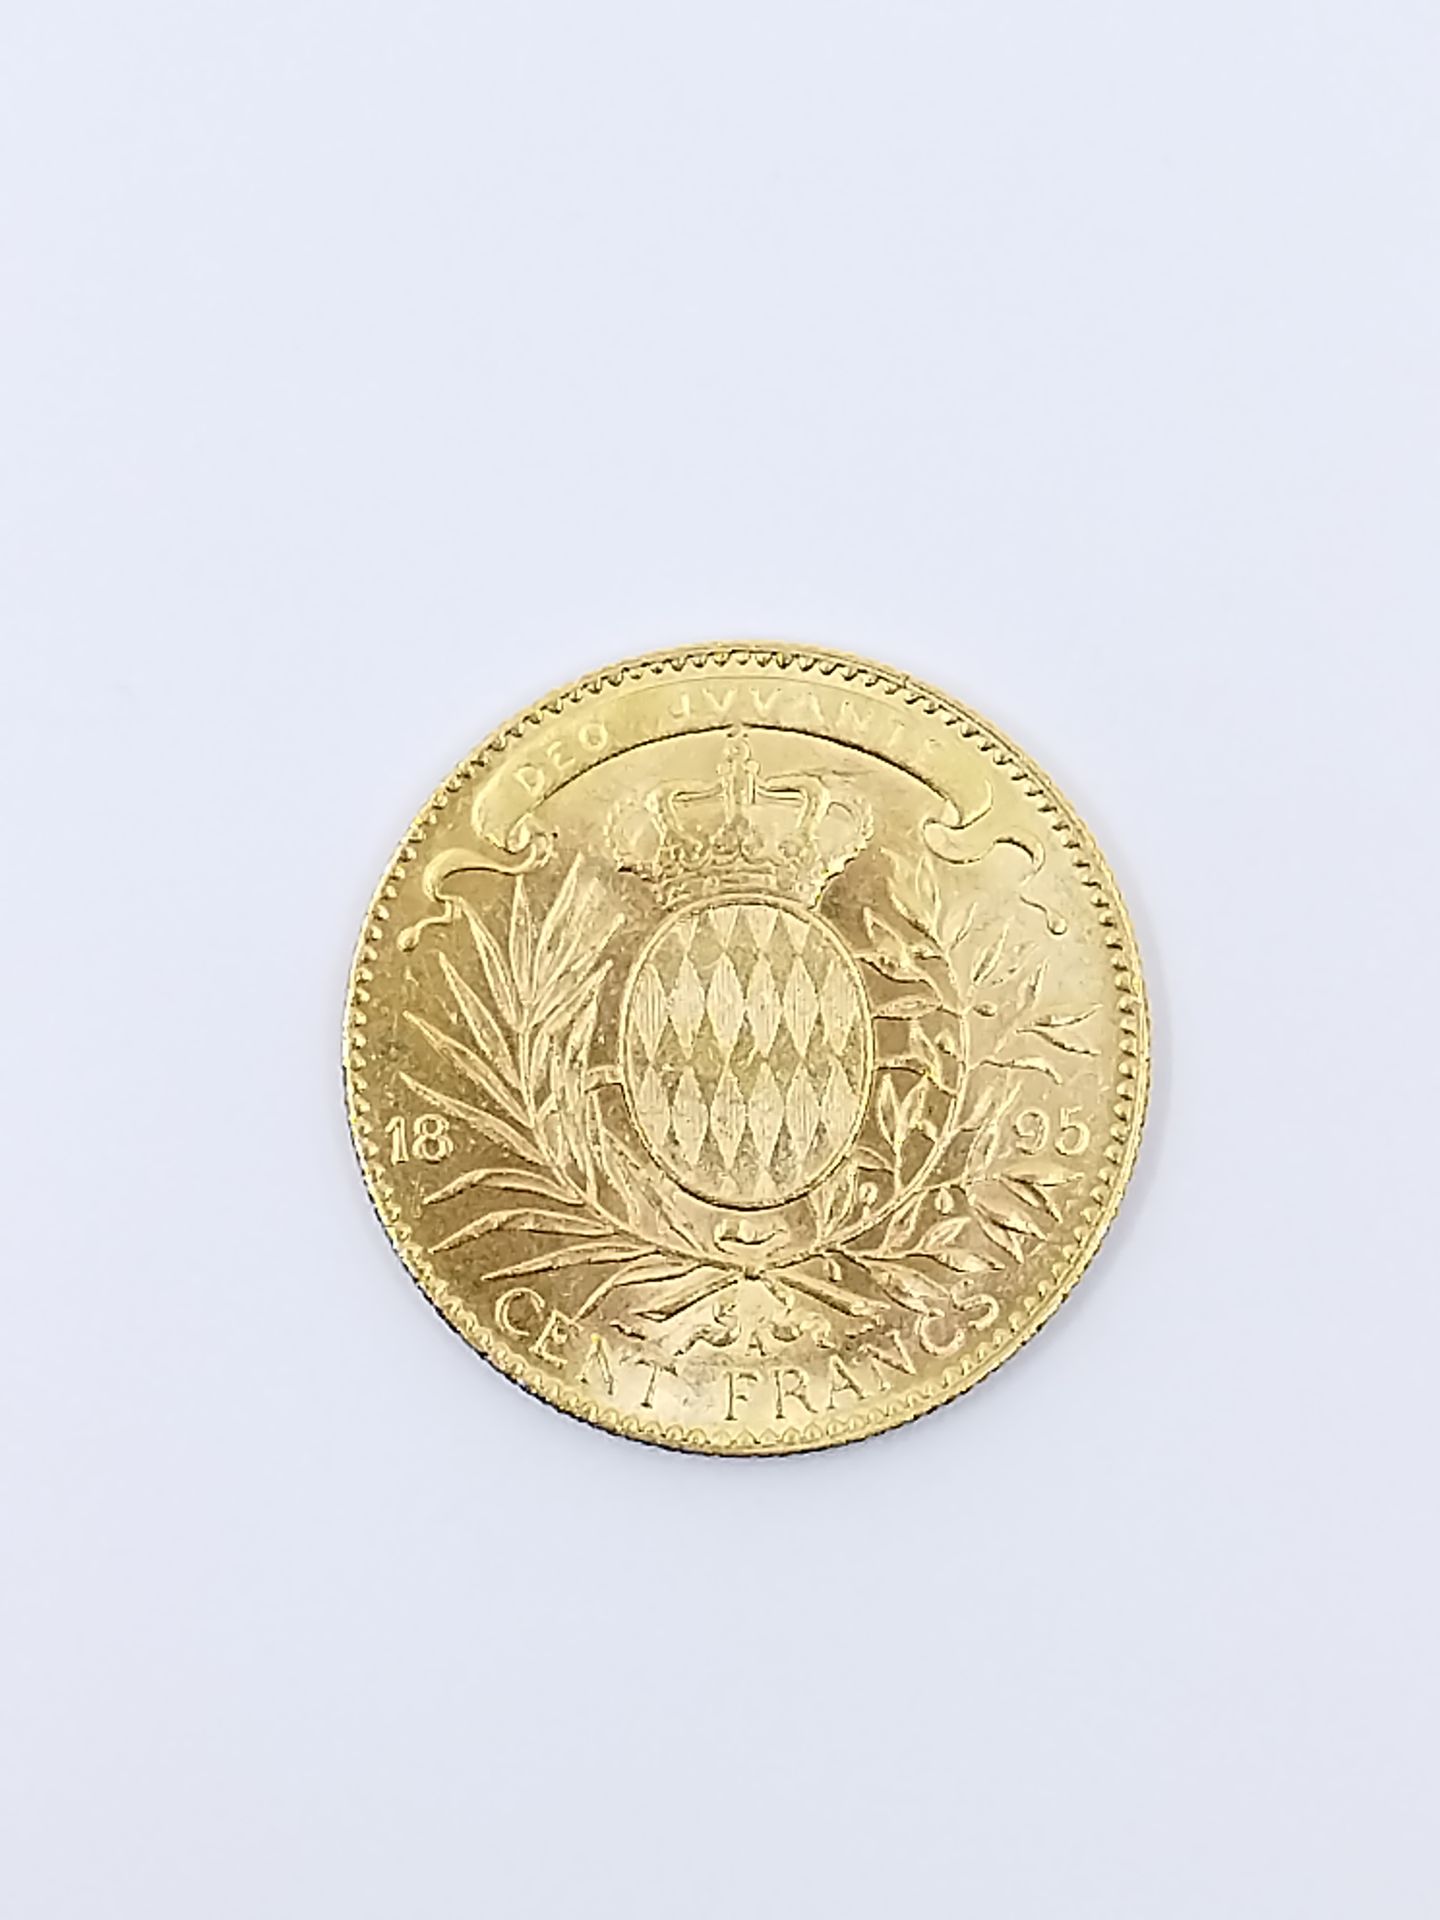 Null PIECE of 100 francs Albert I gold Prince of Monaco 1895

Weight : 32,3 g